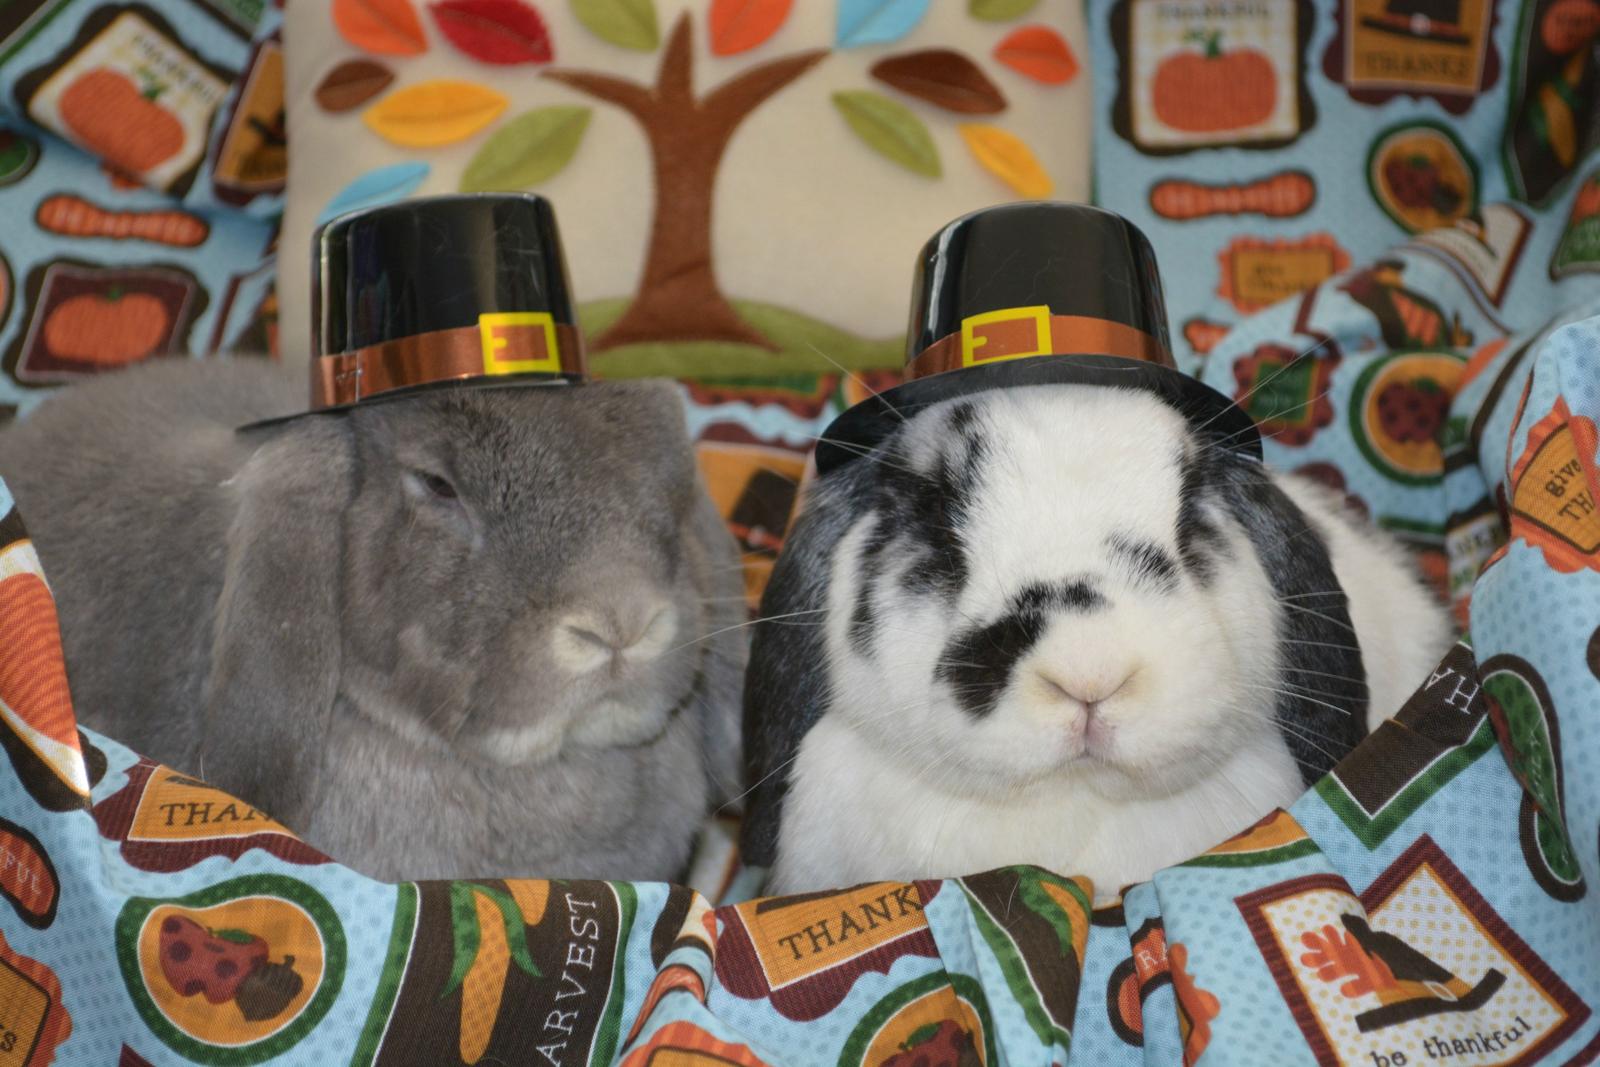 More Bunnies in Thanksgiving Hats!